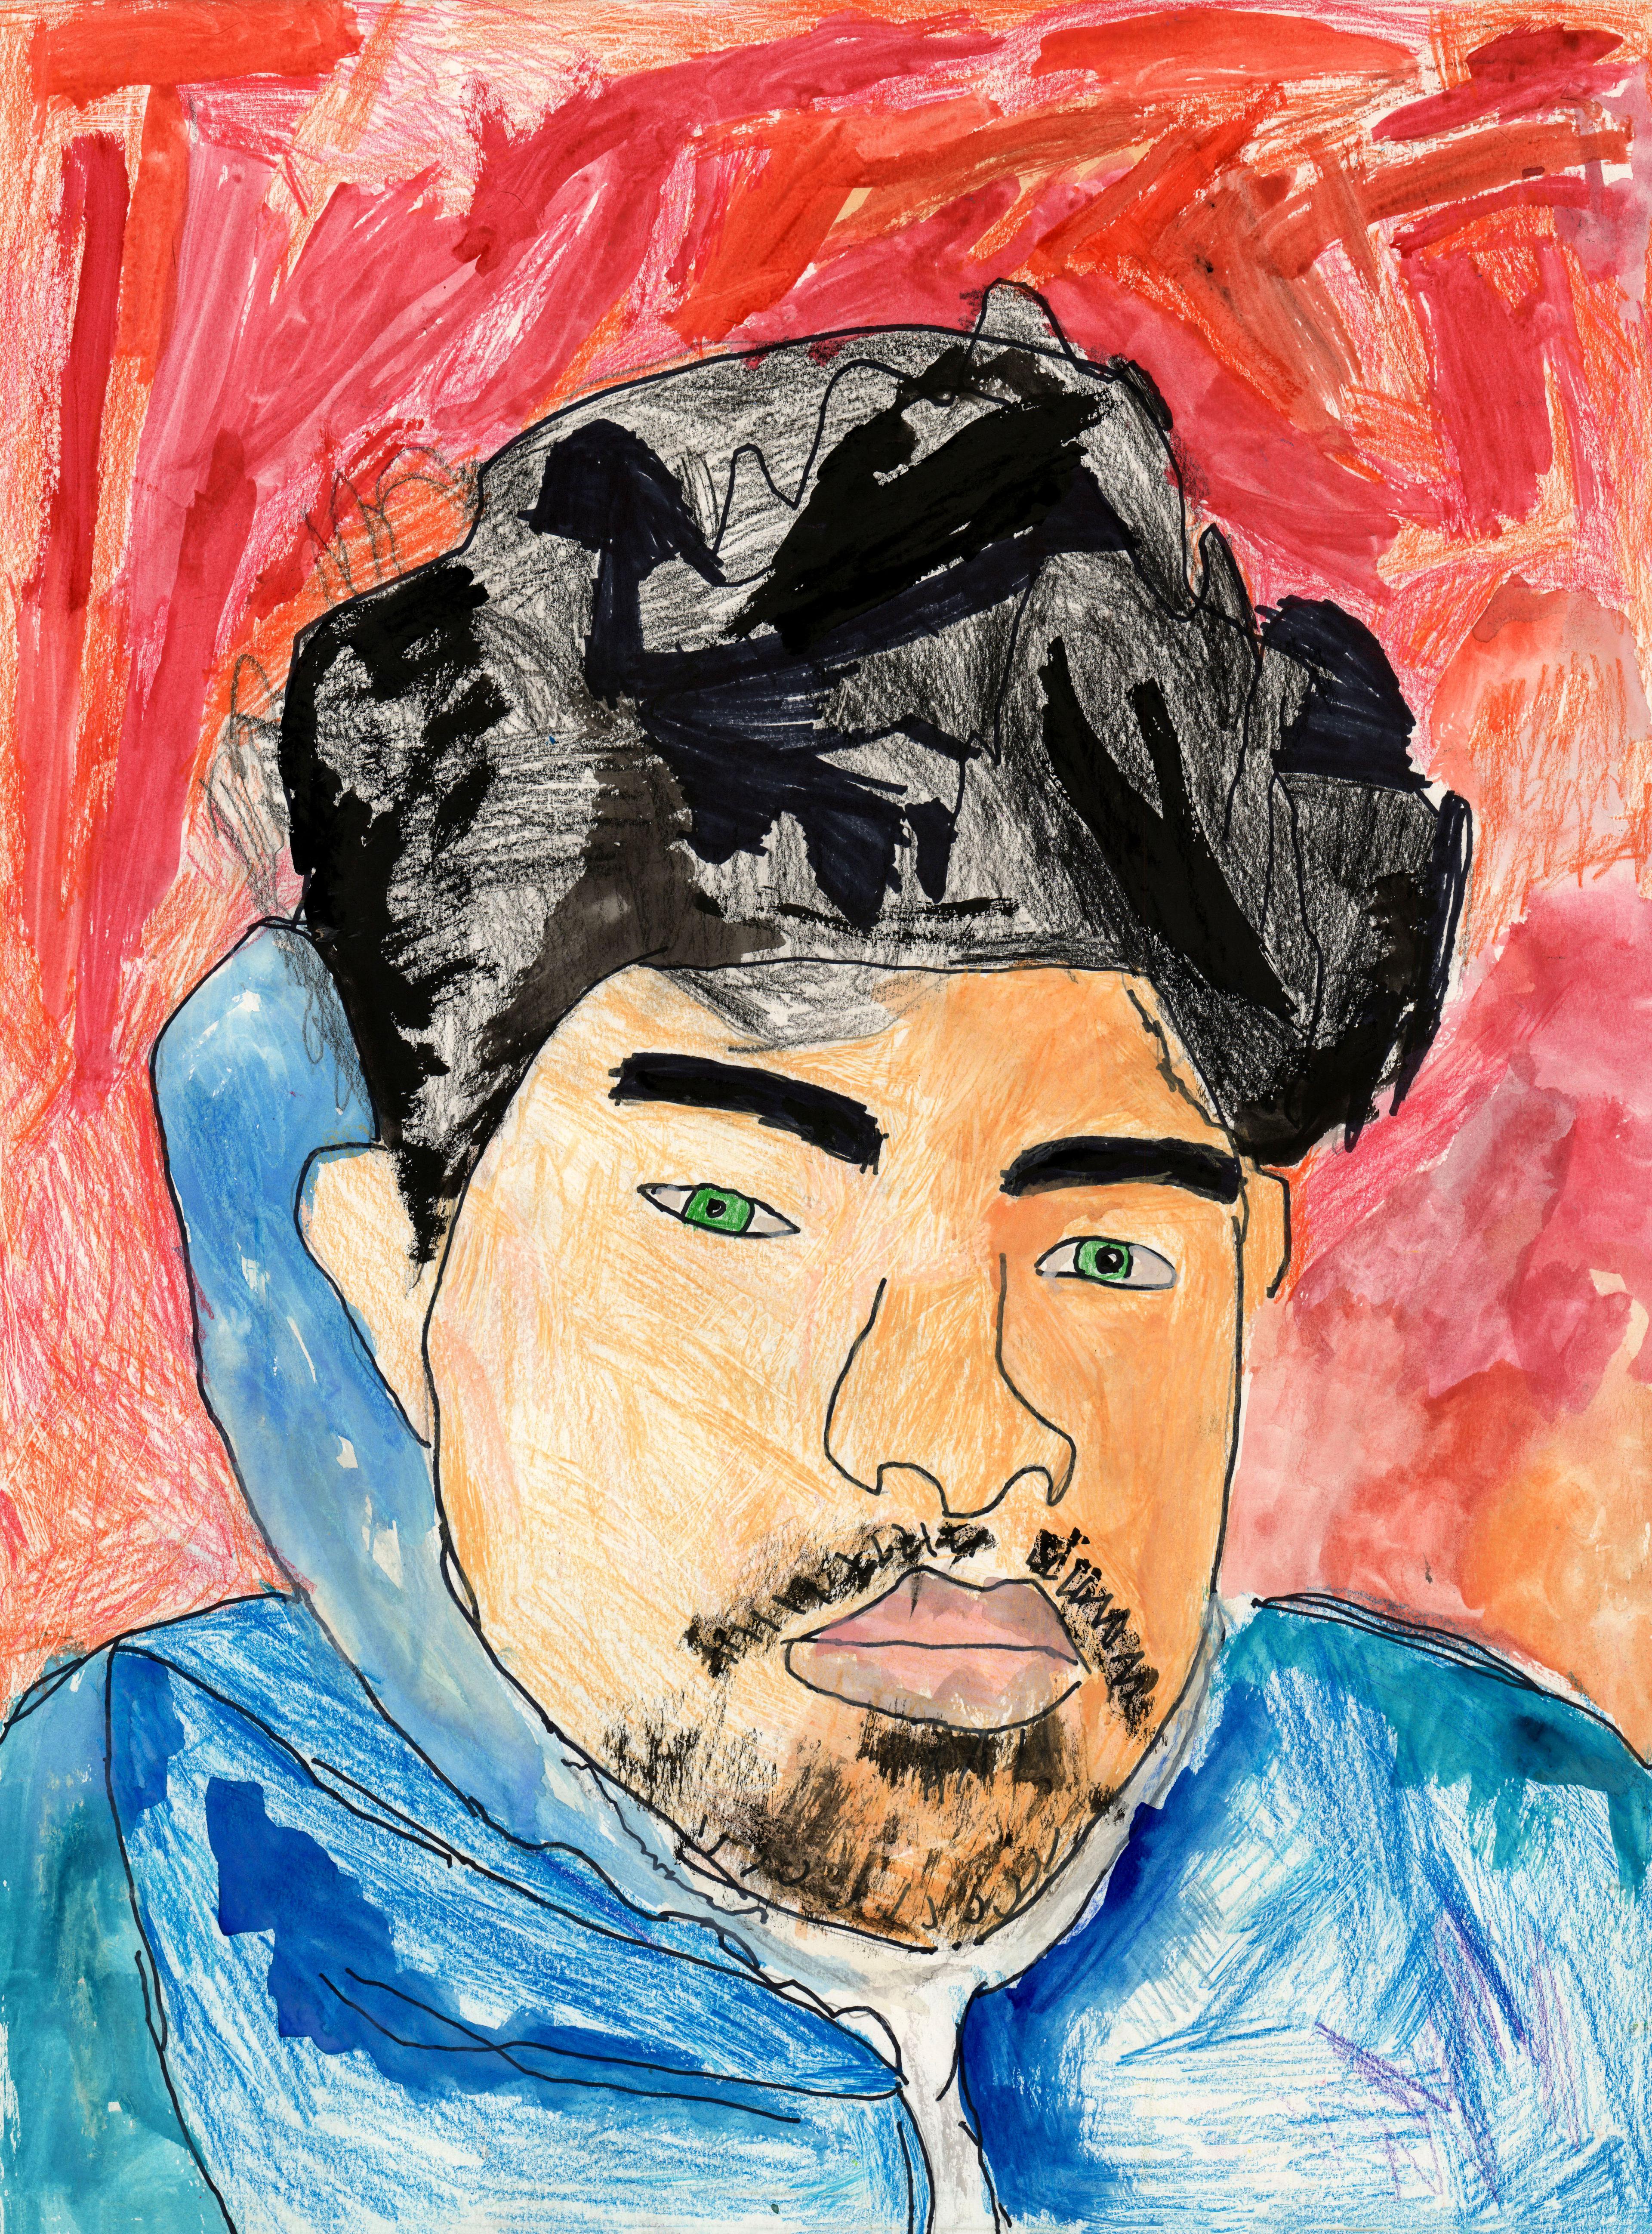 Colored pencil–and-watercolor self-portrait of an adolescent male with tall, thick black hair, piercing green eyes, thick, dark eyebrows, and a slight mustache and faint goatee. He wears a blue windbreaker jacket and the background is a bold red, with a splash of orange at the right.